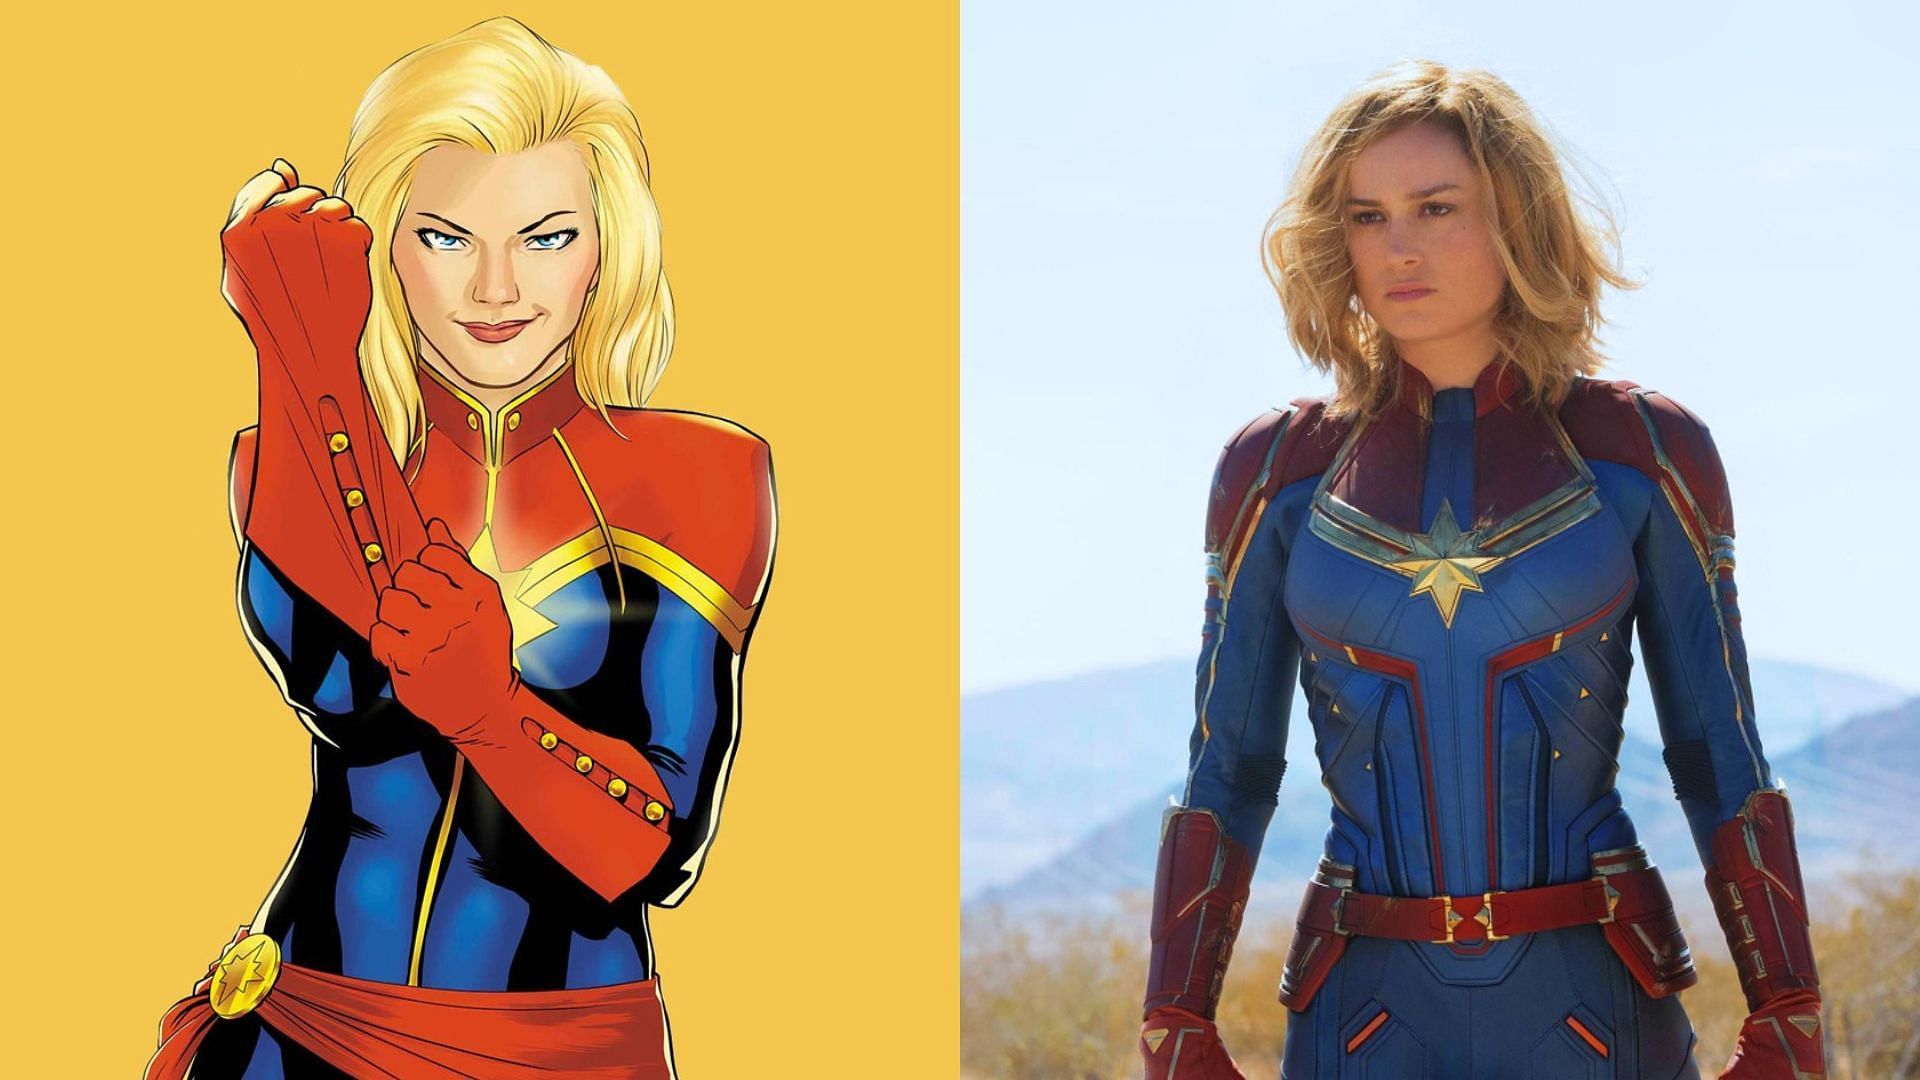 Left: Captain Marvel in comics, Right: Captain Marvel played by Brie Larson in the MCU (Images via Marvel)